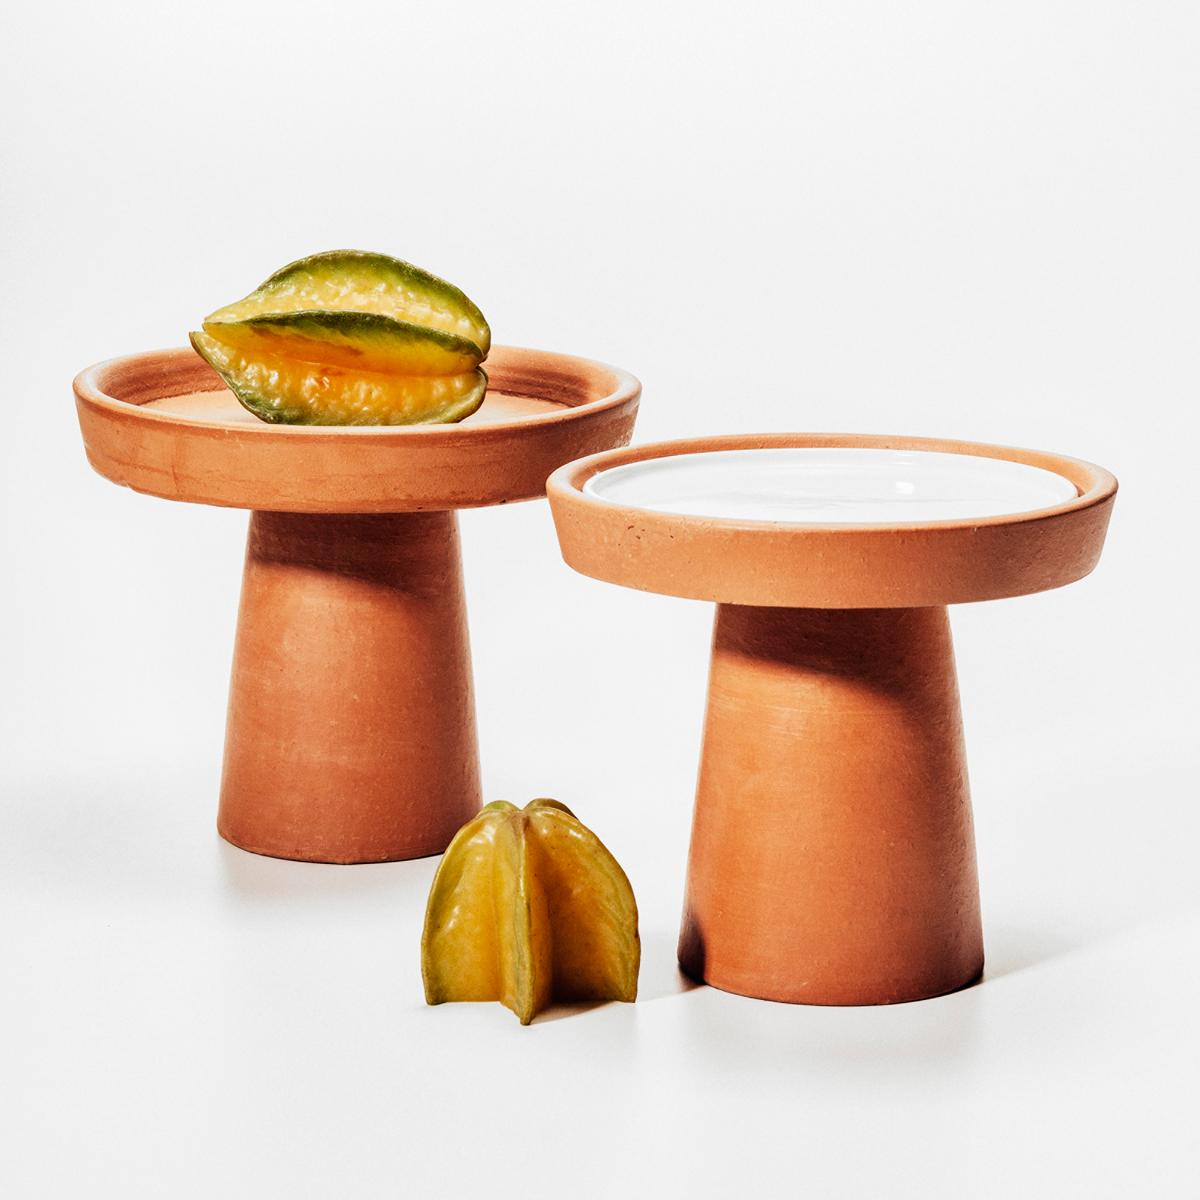 Designed by Brunno Jahara, contemporary Brazilian design, Clay, Brazil, 2014.

Set of trays with two different sizes, large and medium. The base rises and expands into a plate shape. 

Measures: Large tray 1 level, H 10, 24 in. x Ø 7, 48 in., H